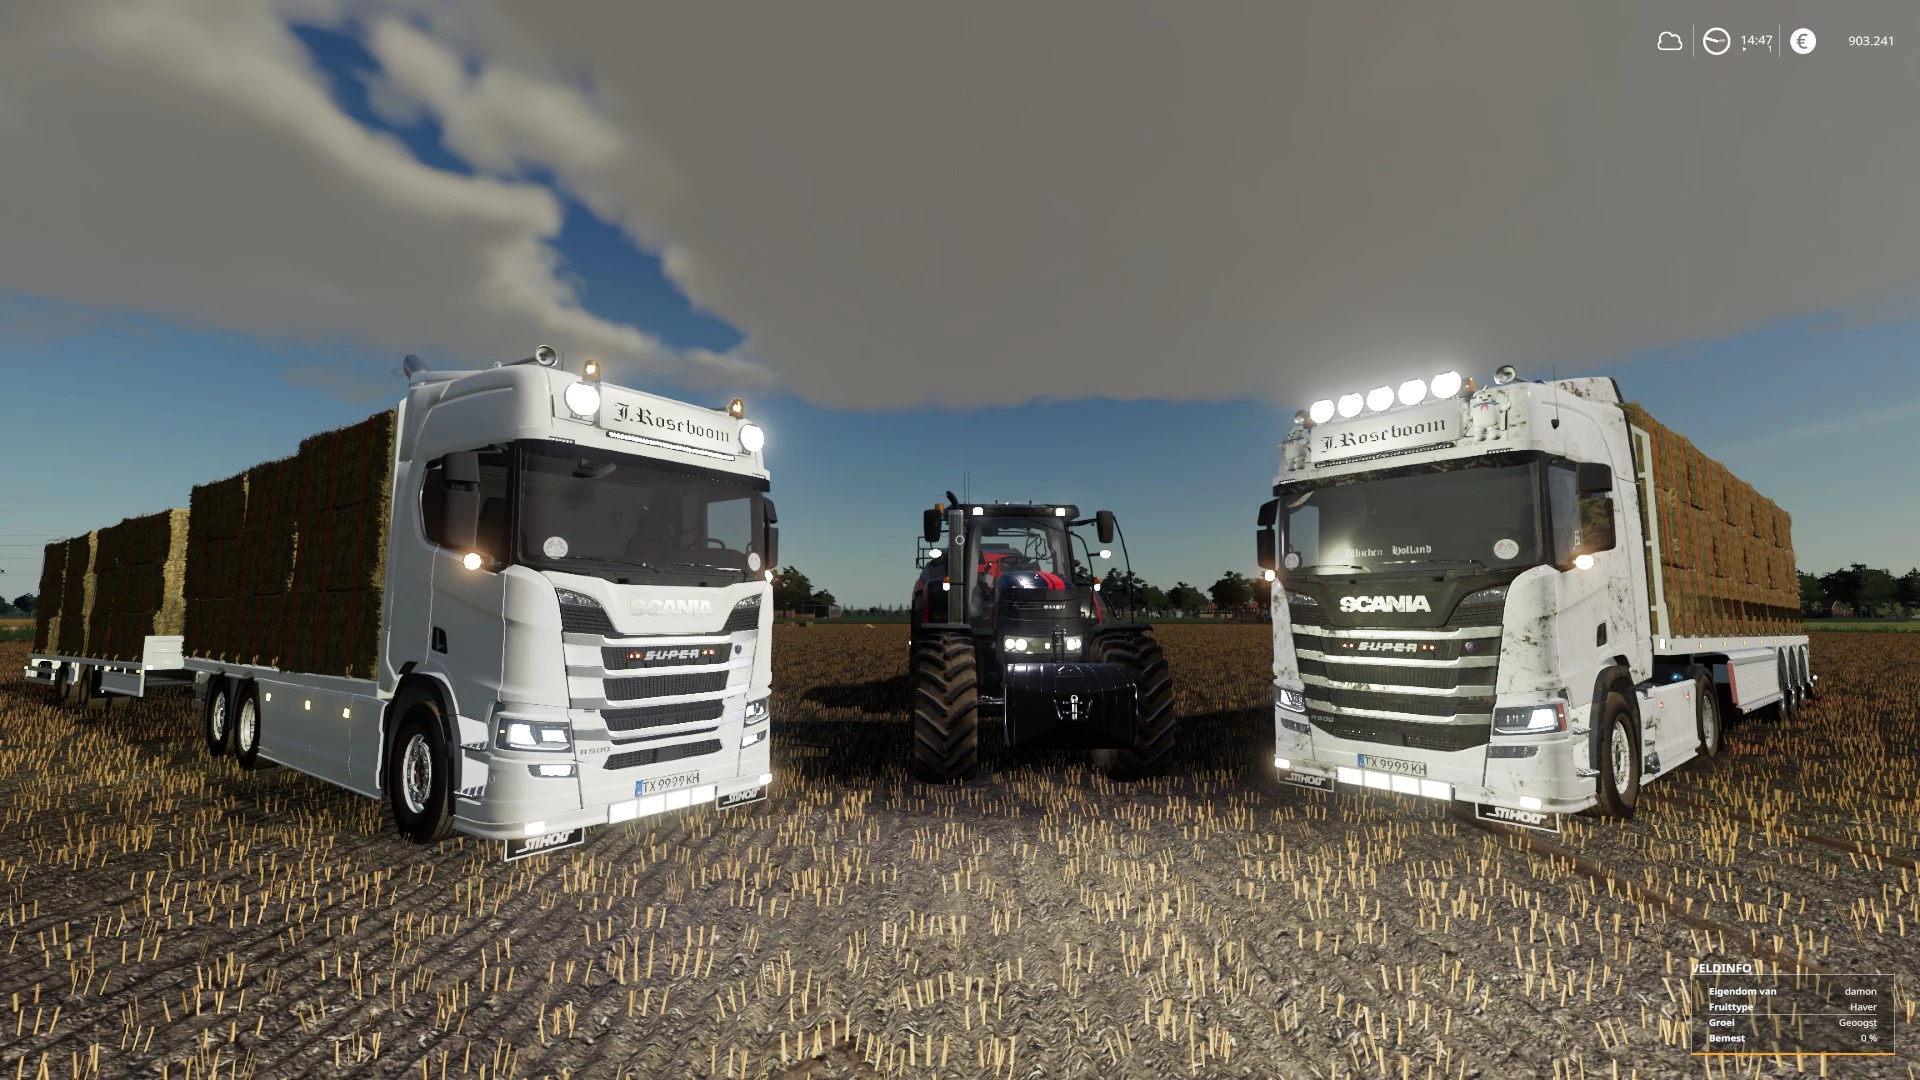 Fs 20 Indian Tractor Mod Apk v0.0.0.81 - Download do Google para Android